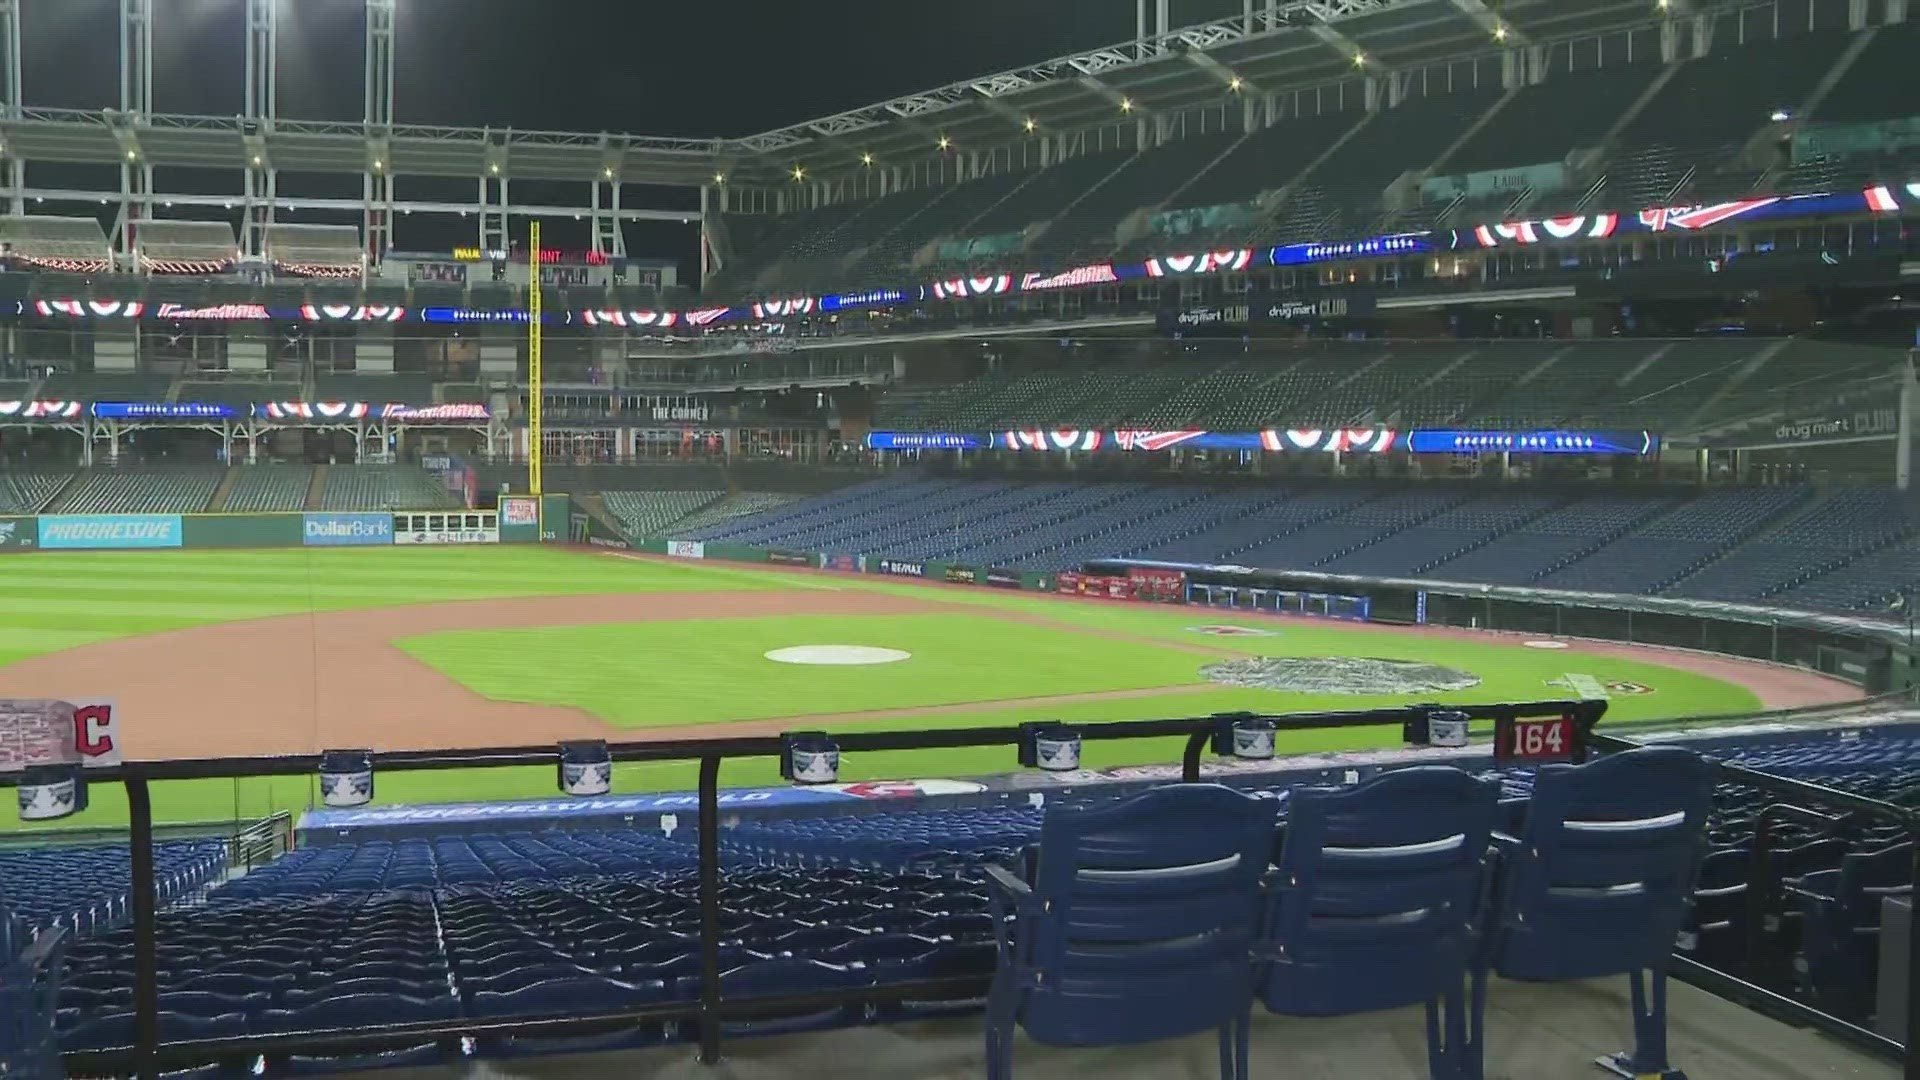 Baseball is back in Cleveland! 3News' Austin Love is giving us a peek inside Progressive Field just hours before the Cleveland Guardians home opener Monday.